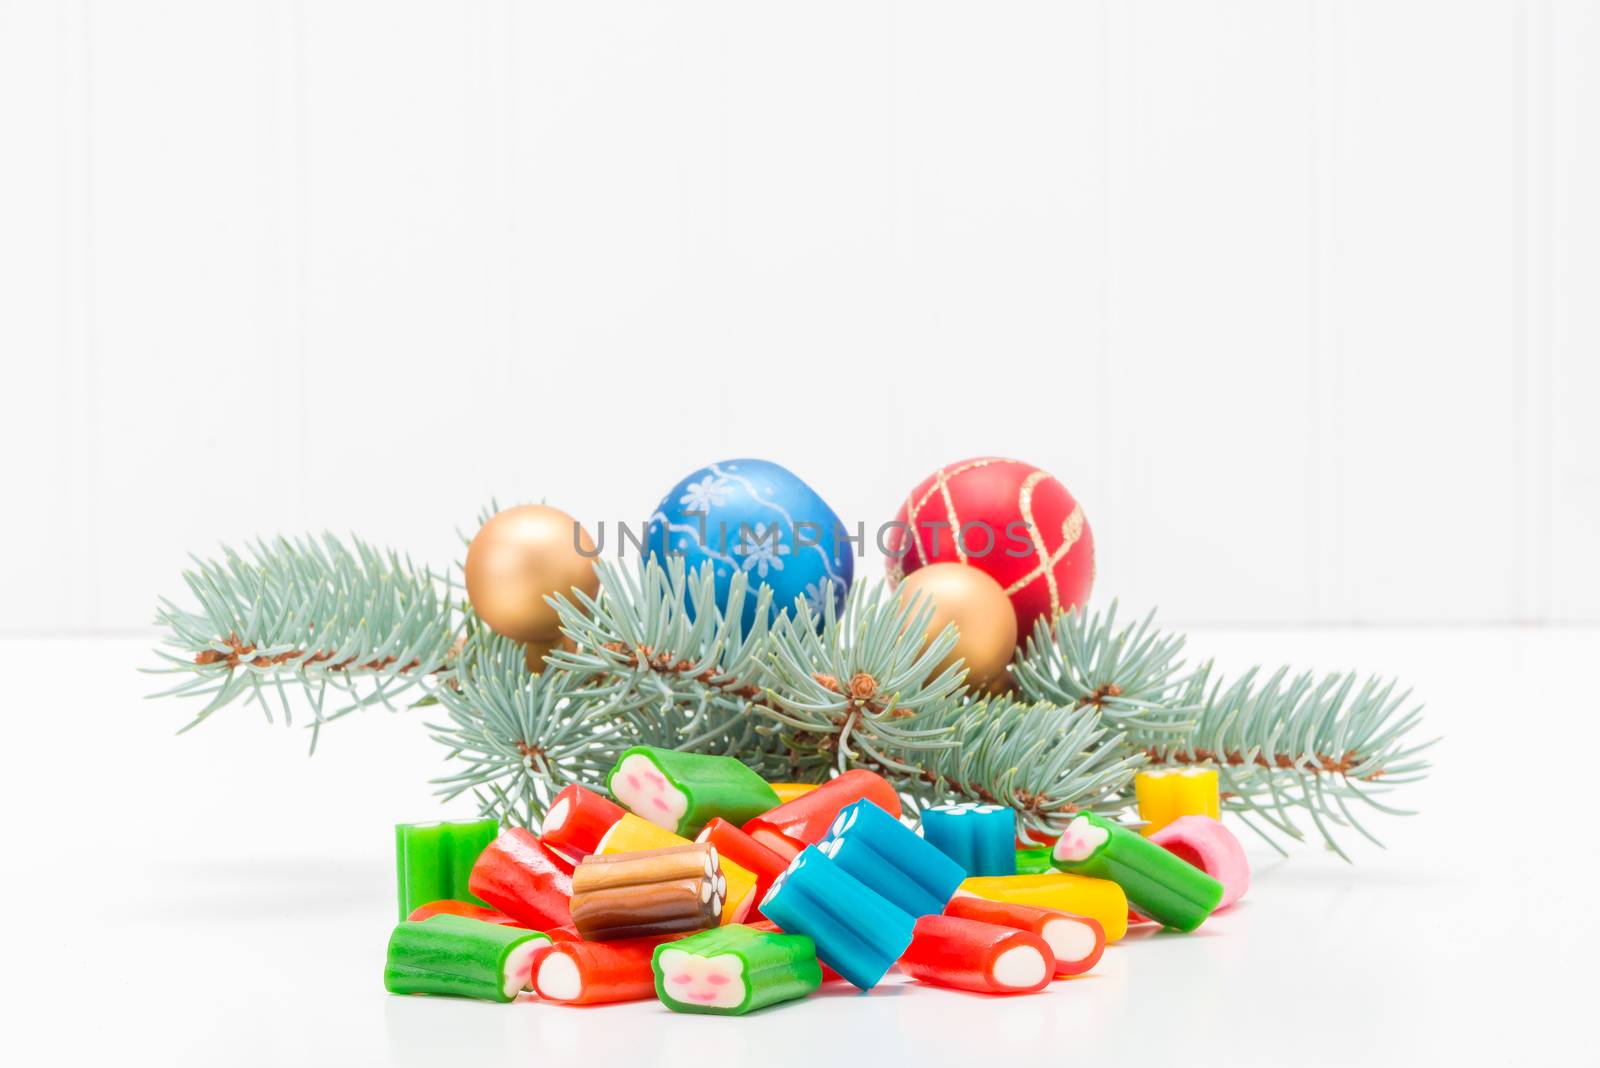 Colorful array of mixed candy with a festive seasonal background.